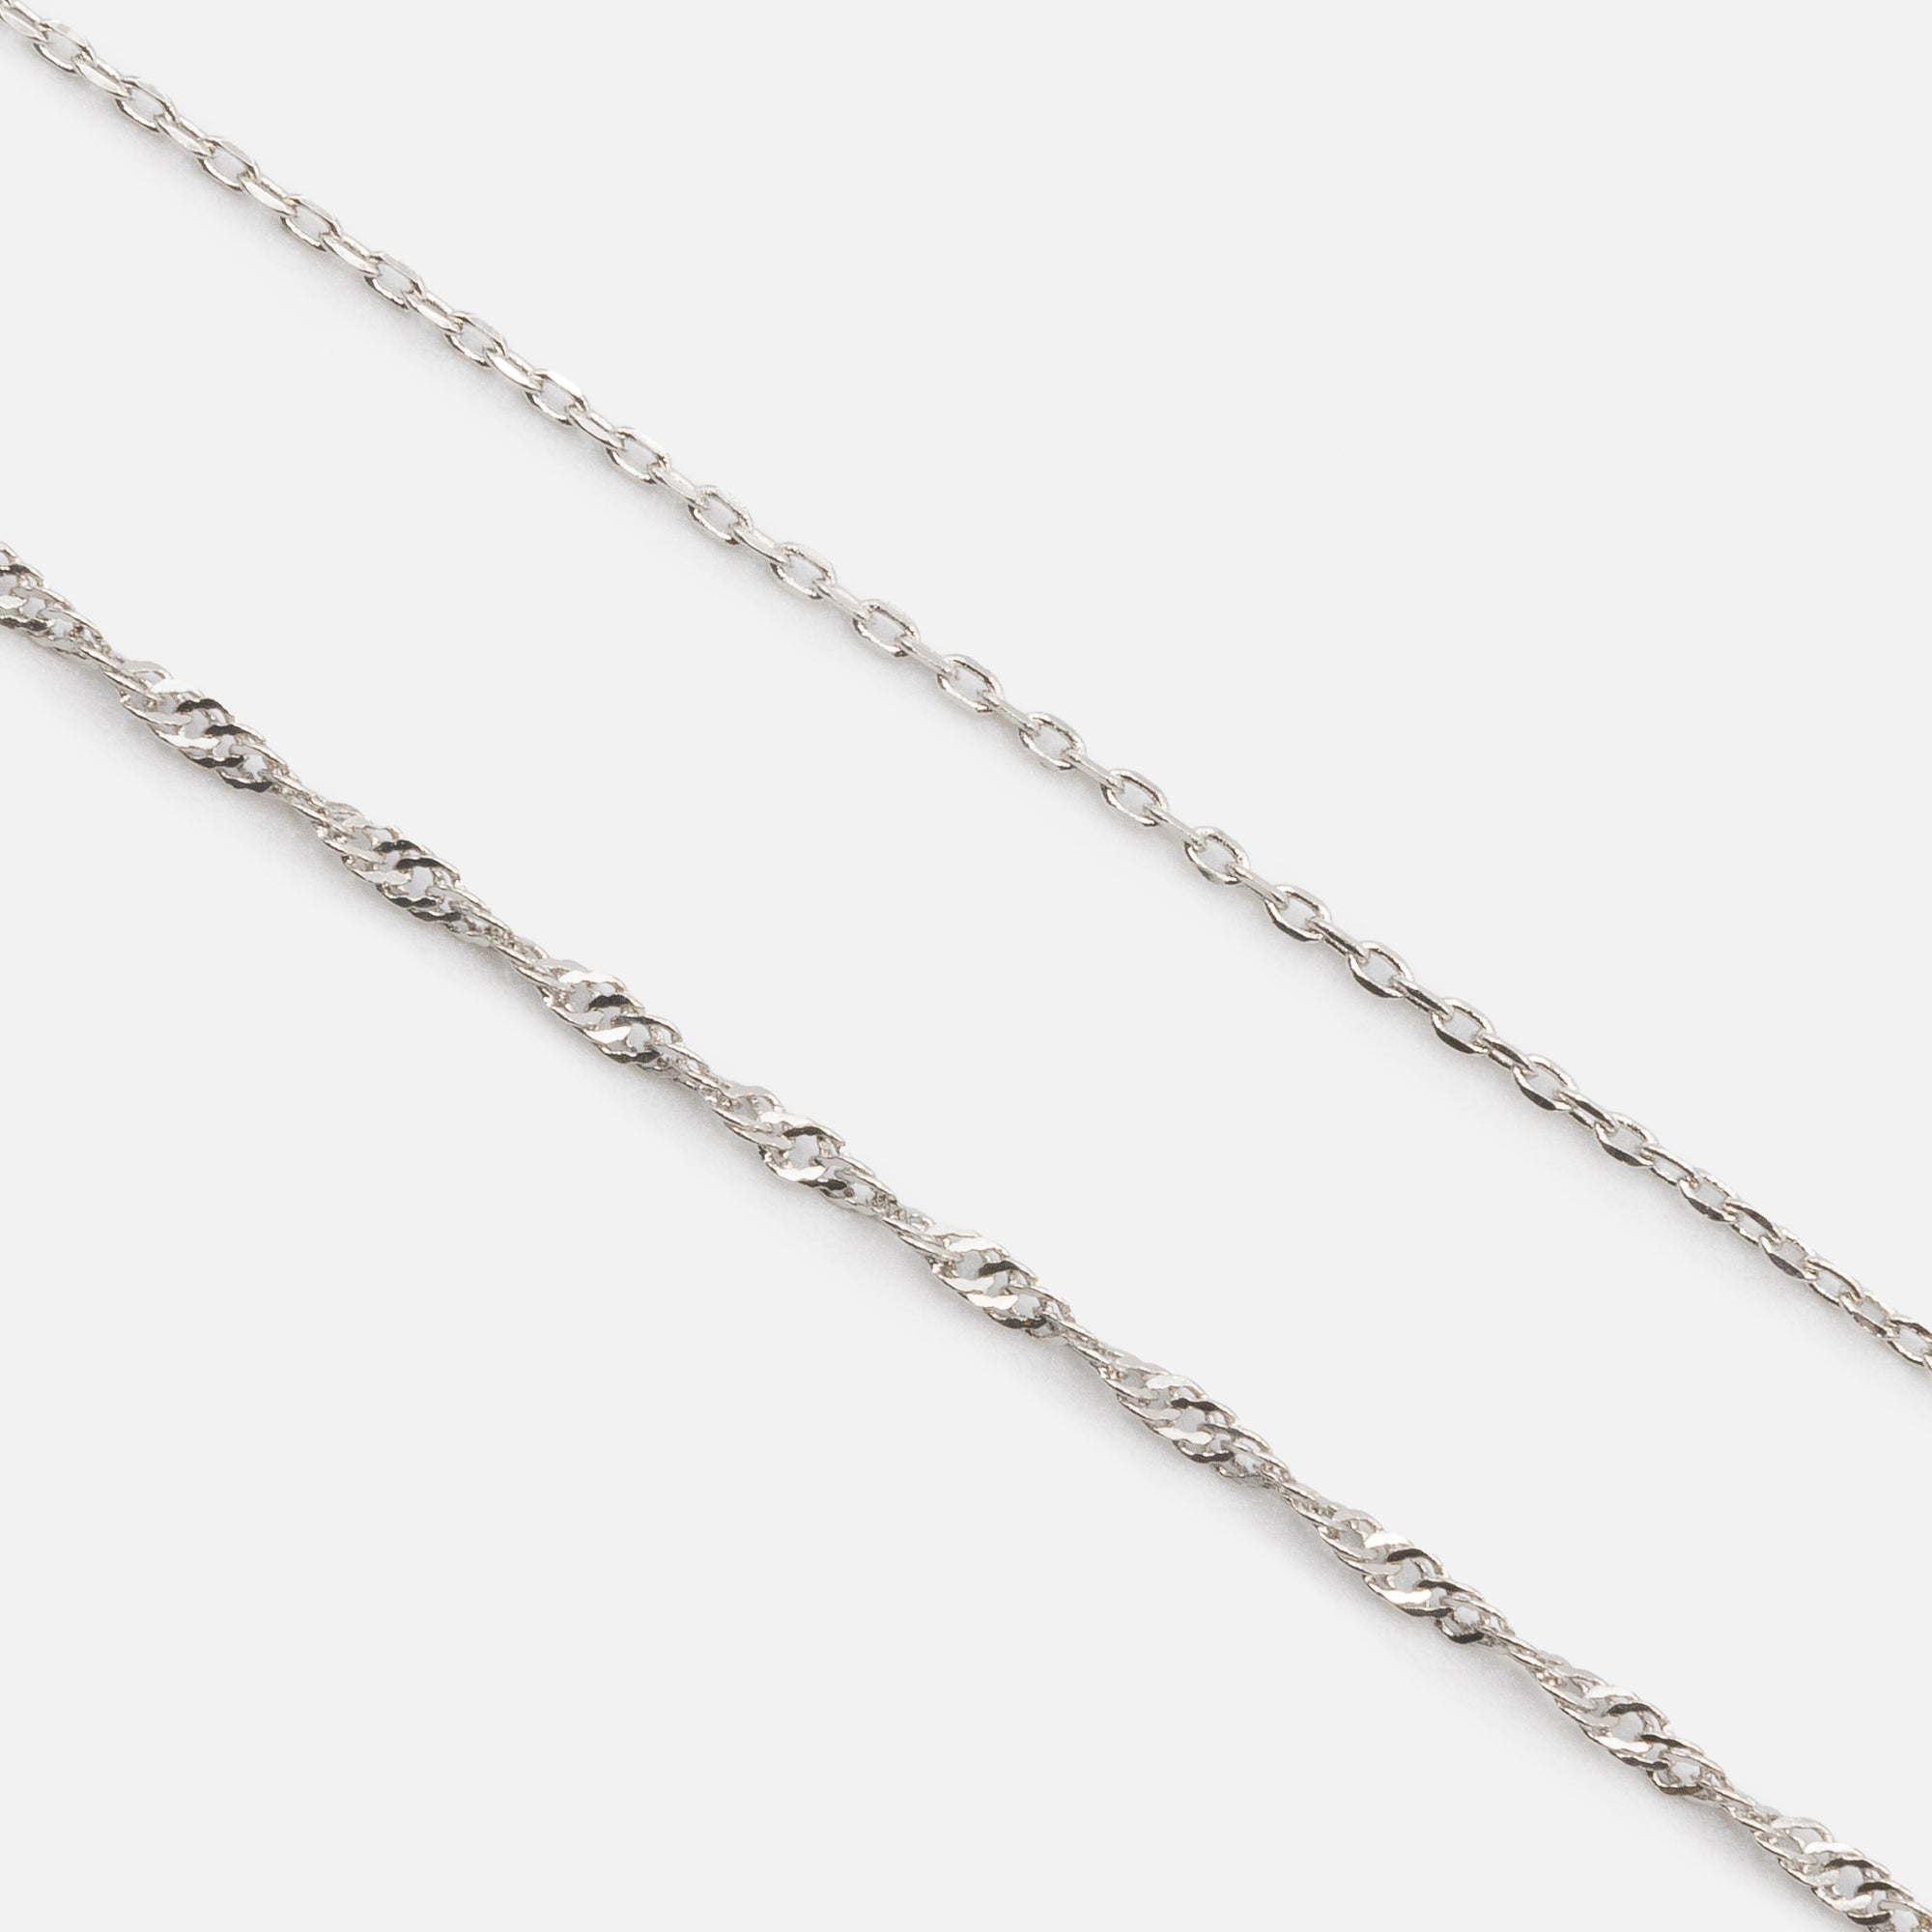 Double silver body chain with cable and cable links